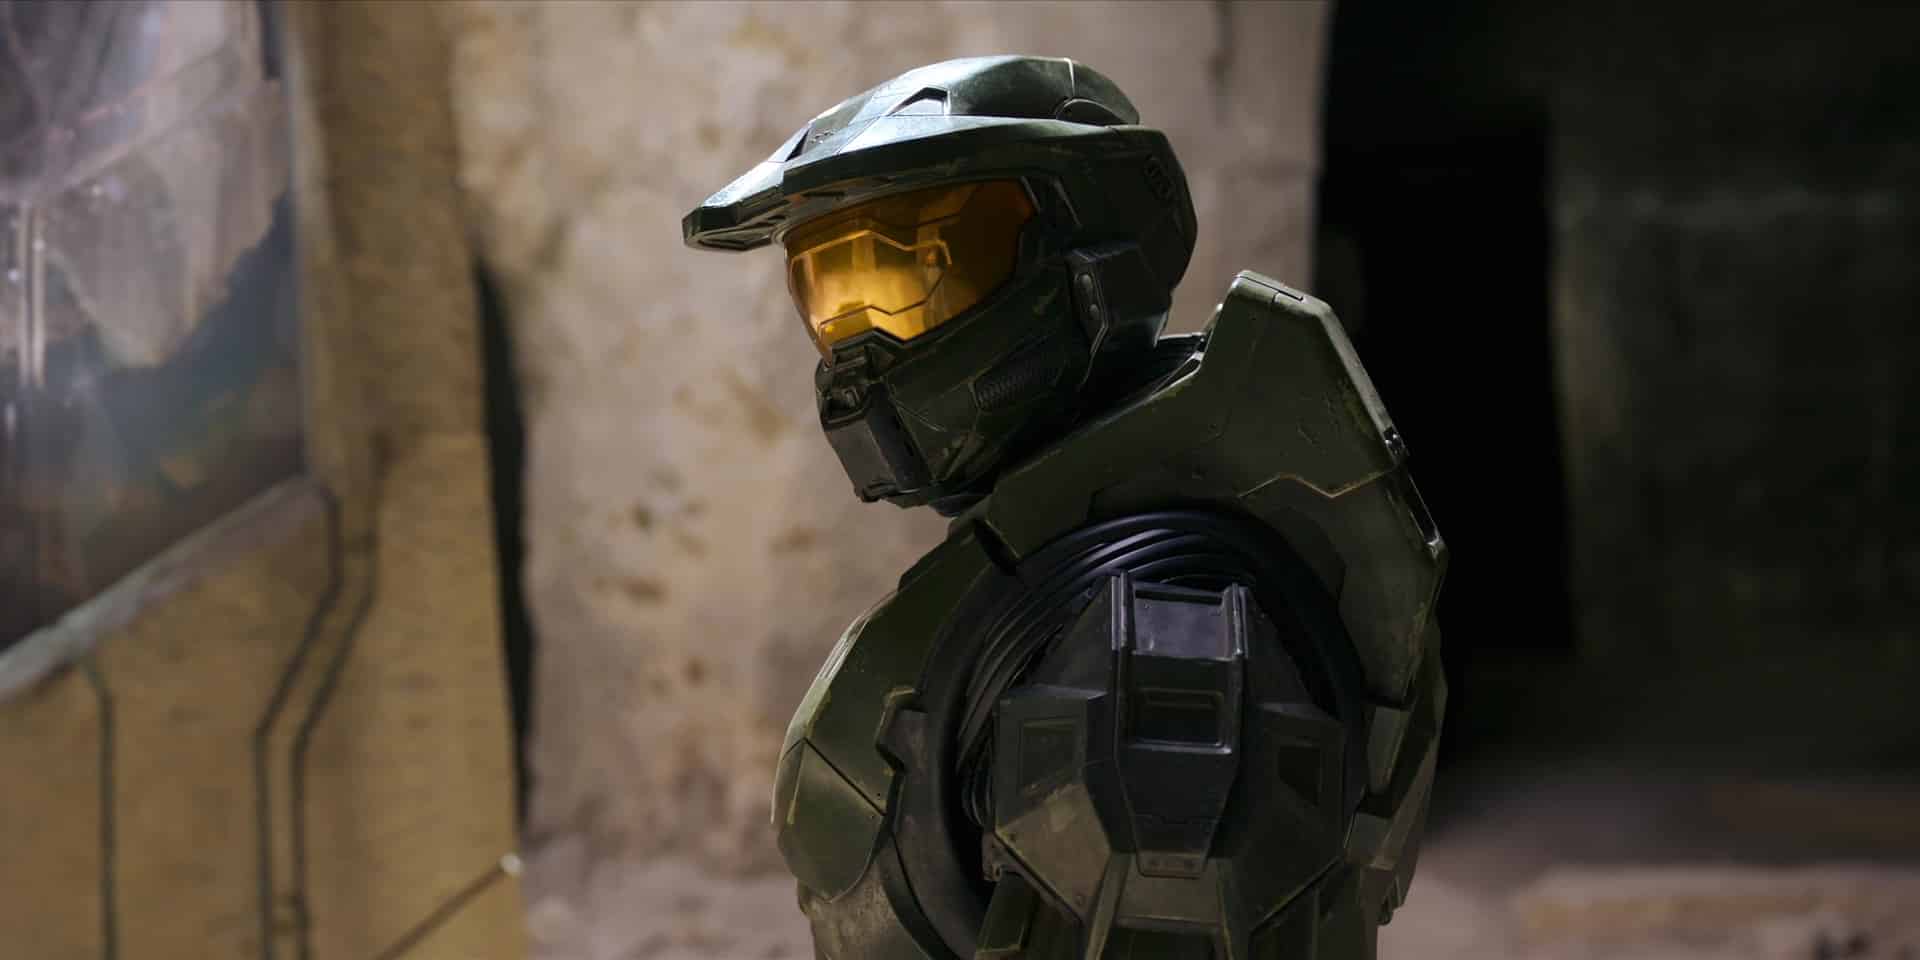 Halo episode 3 release date, time and plot preview